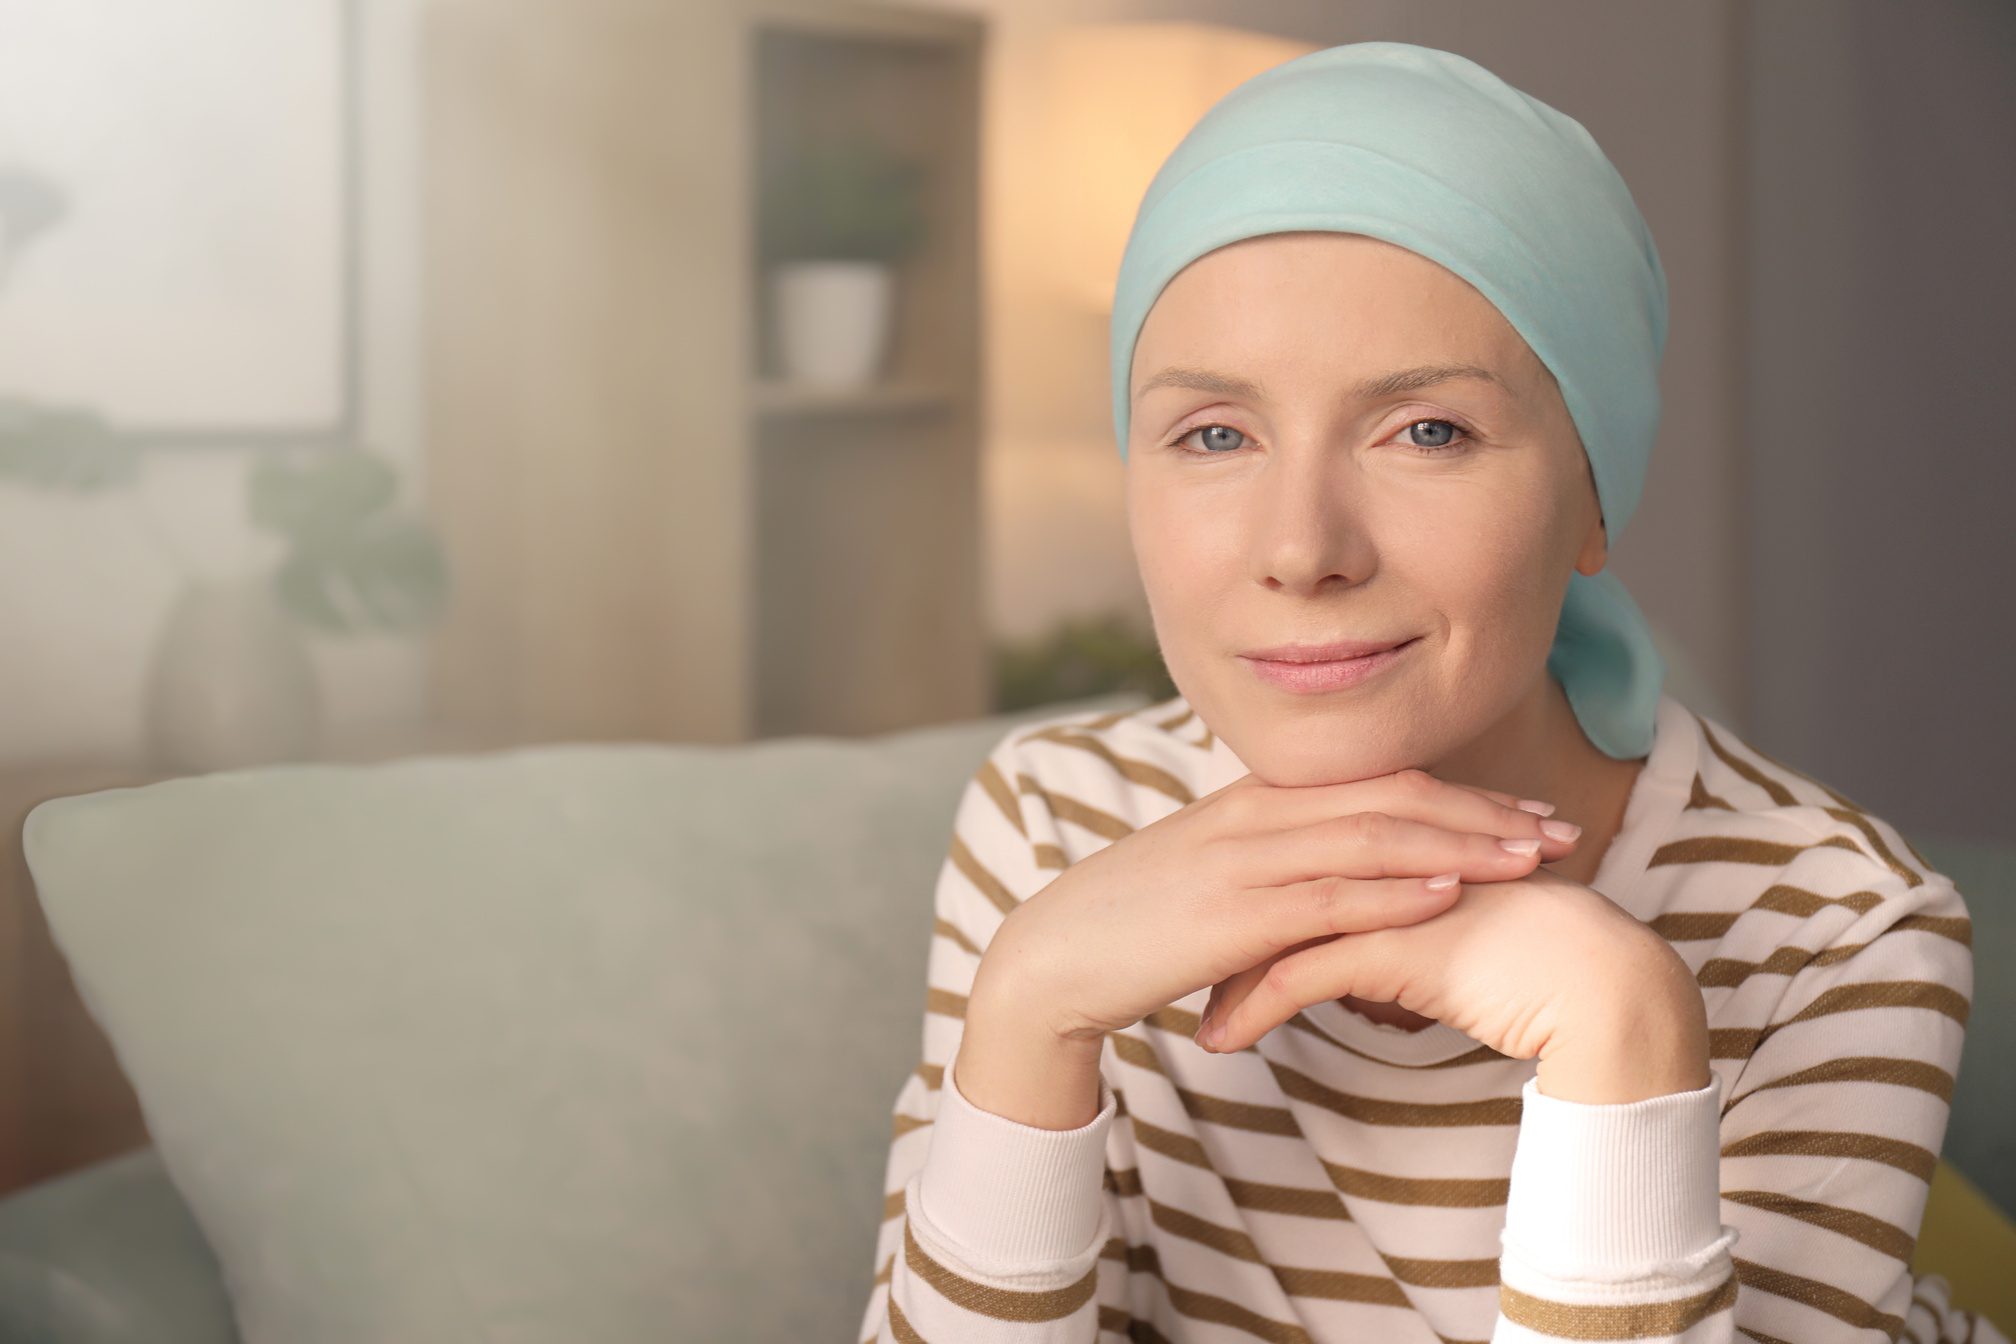 Young Woman with Cancer in Headscarf Indoors